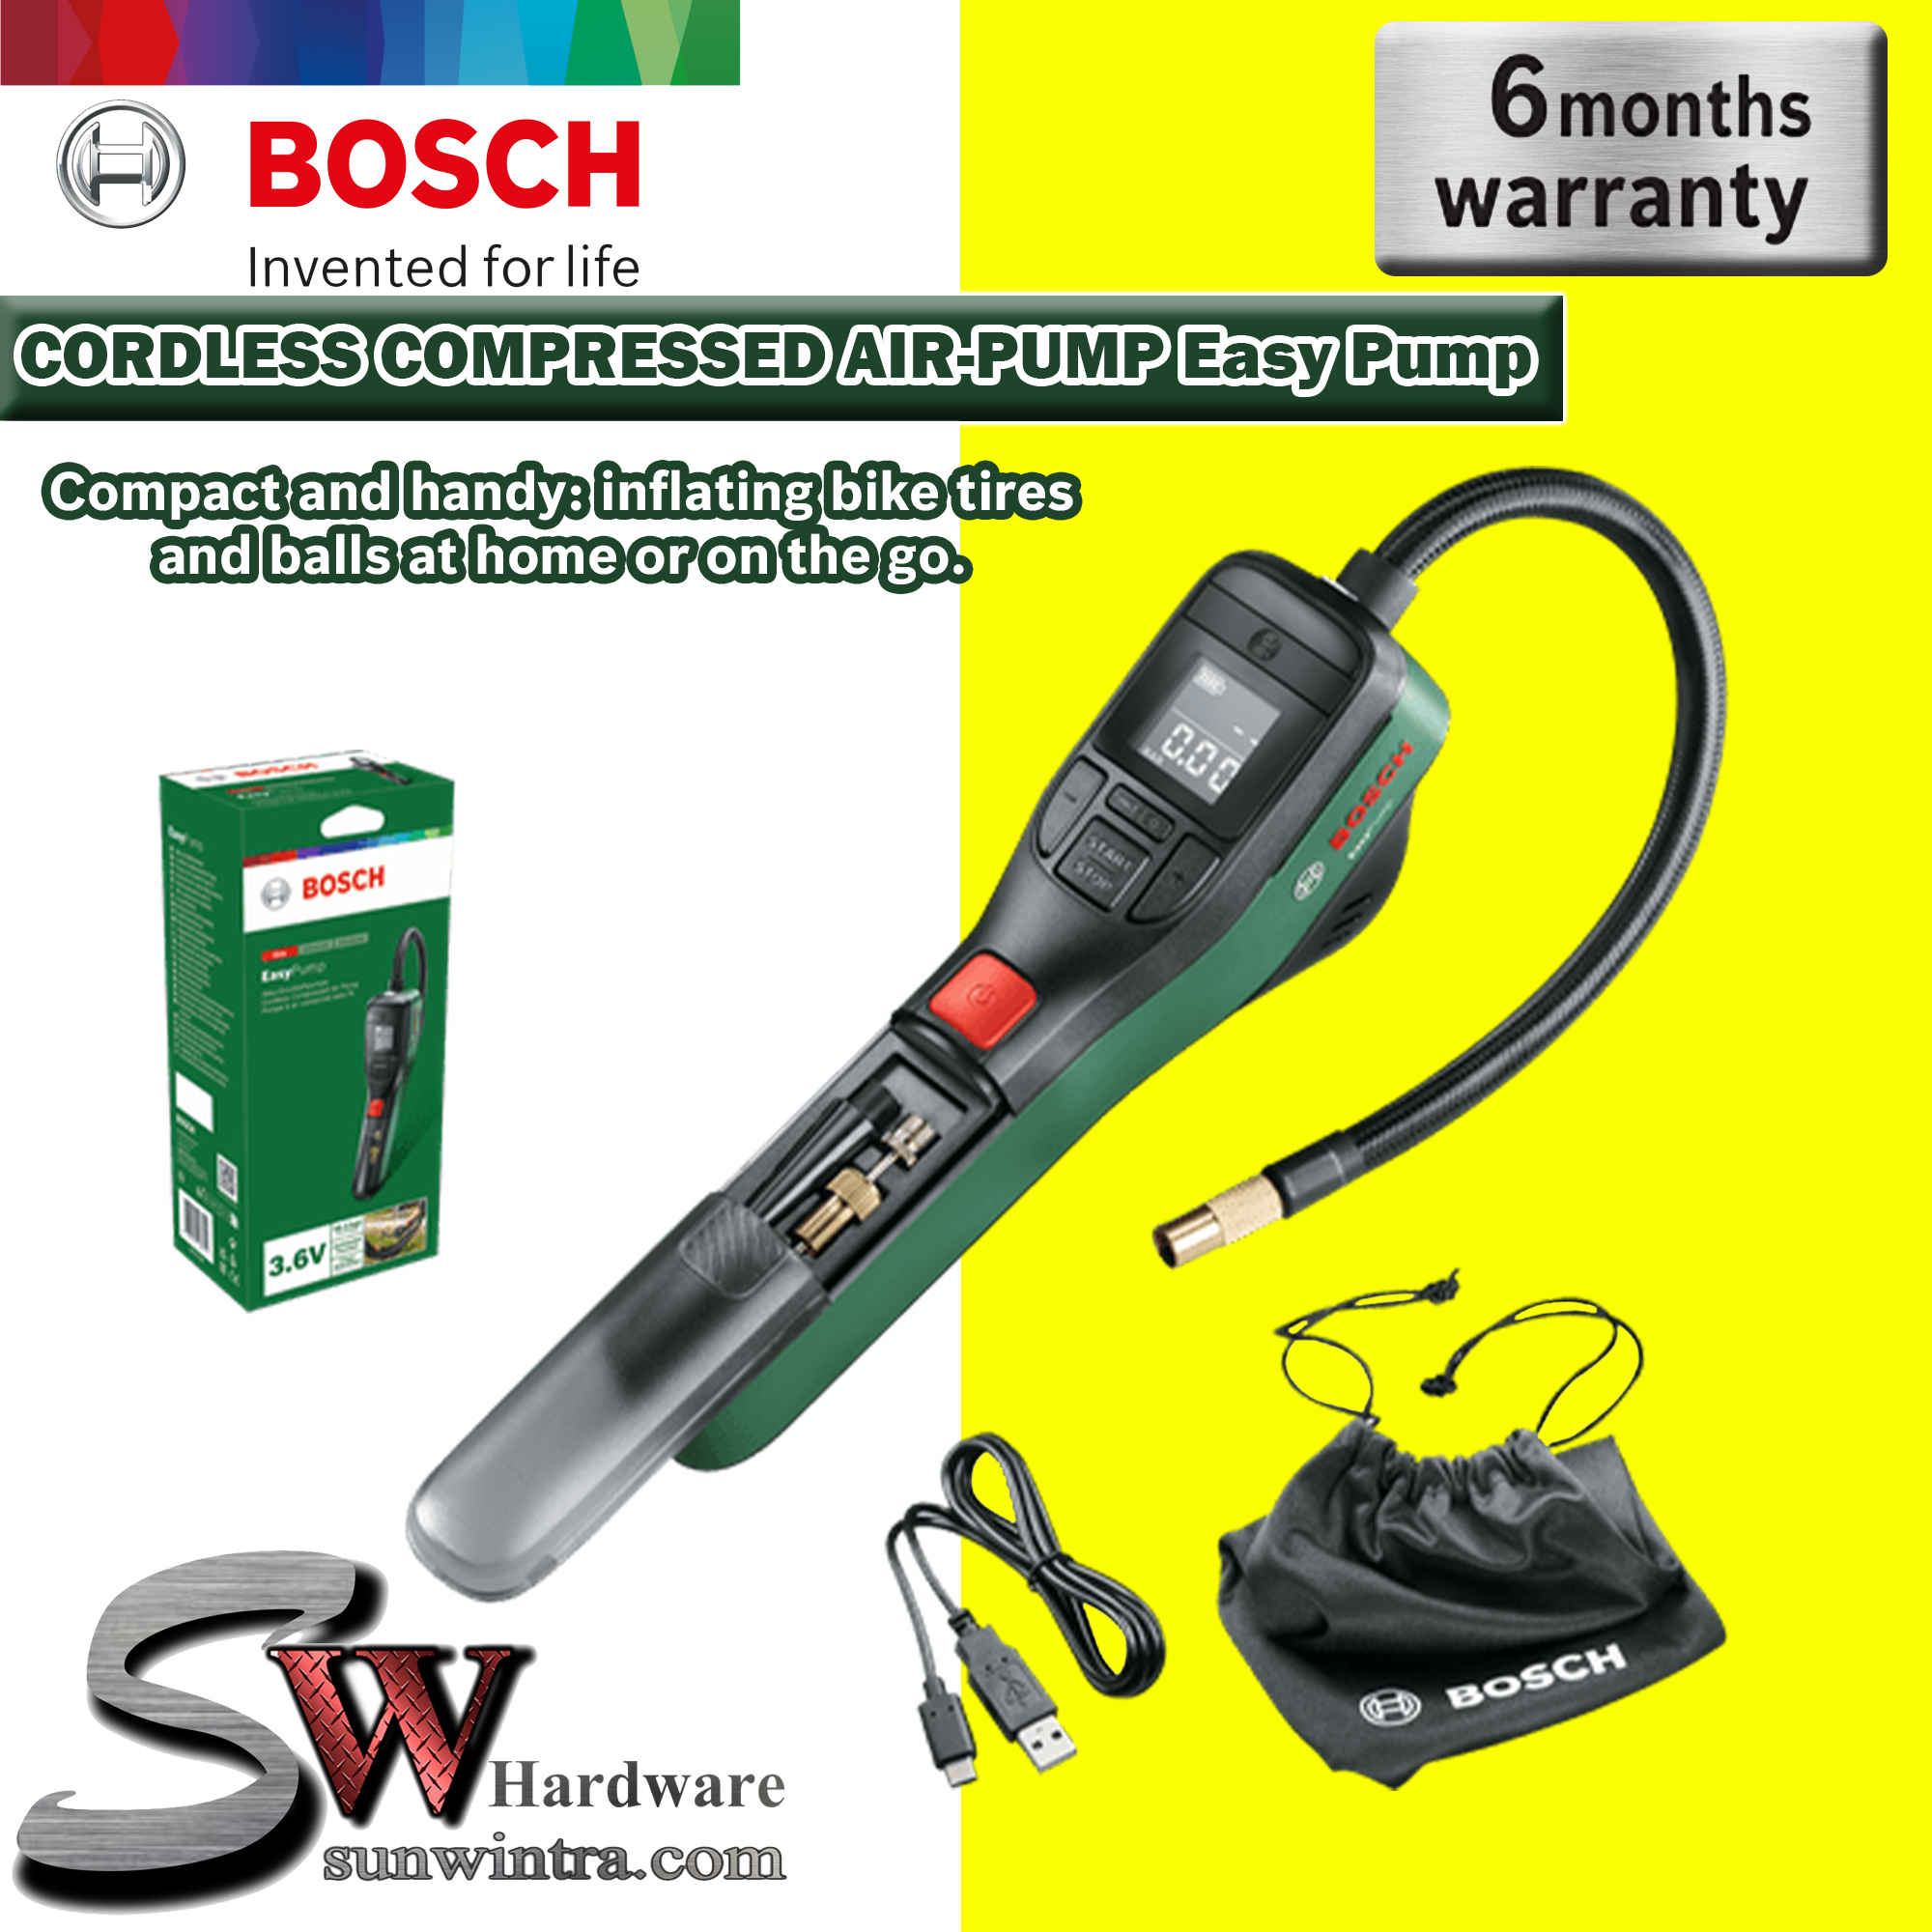 Bosch Easy Pump 3.6V Cordless Compressed Air-Pump – MY Power Tools